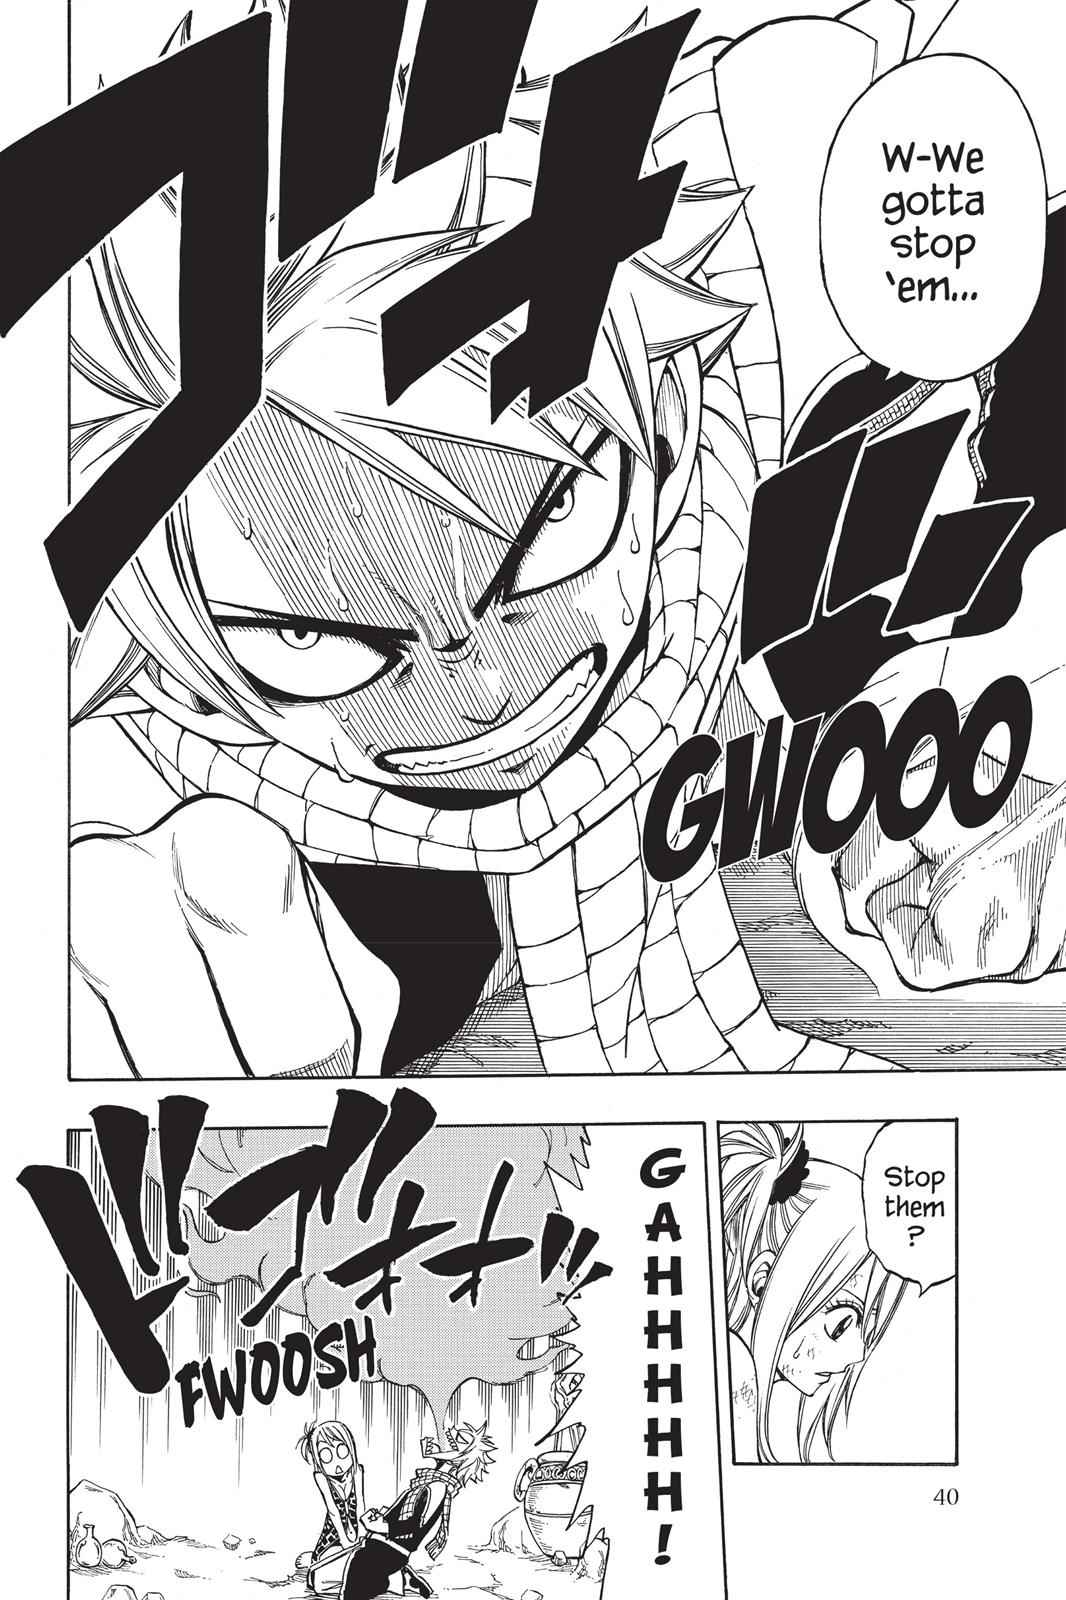  Chapter 180 image 018